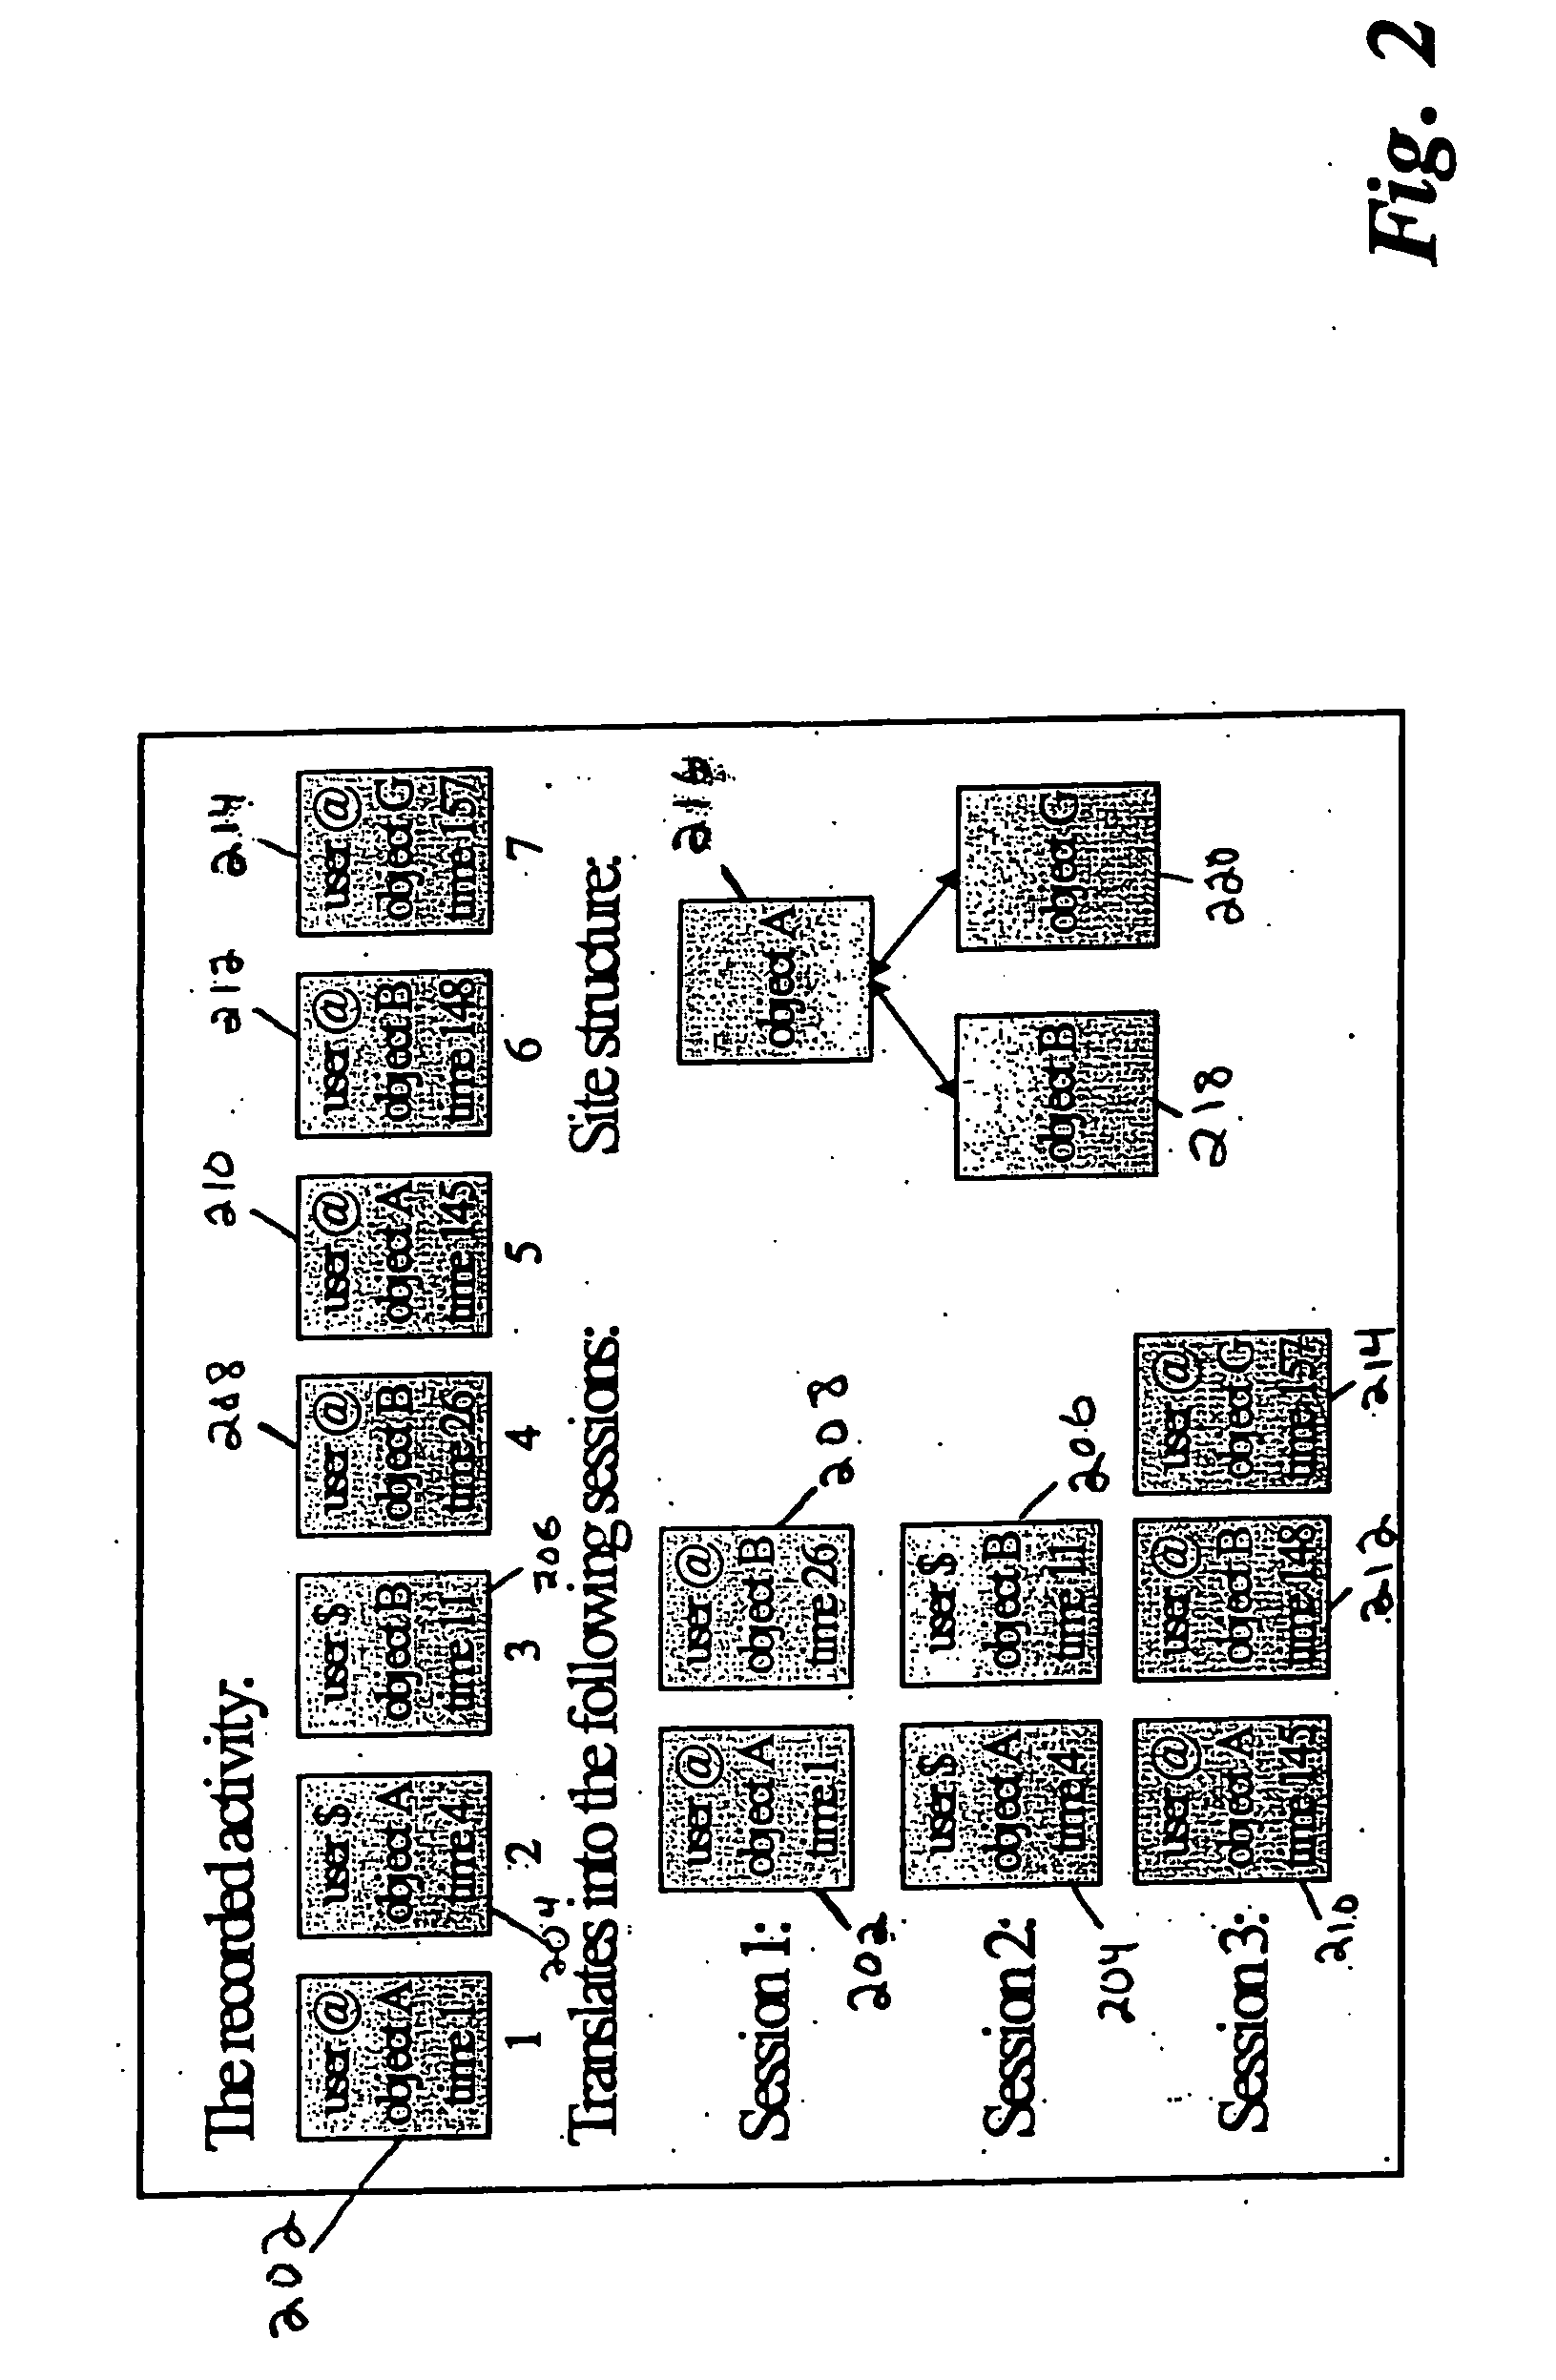 System and method for modifying links within a web site